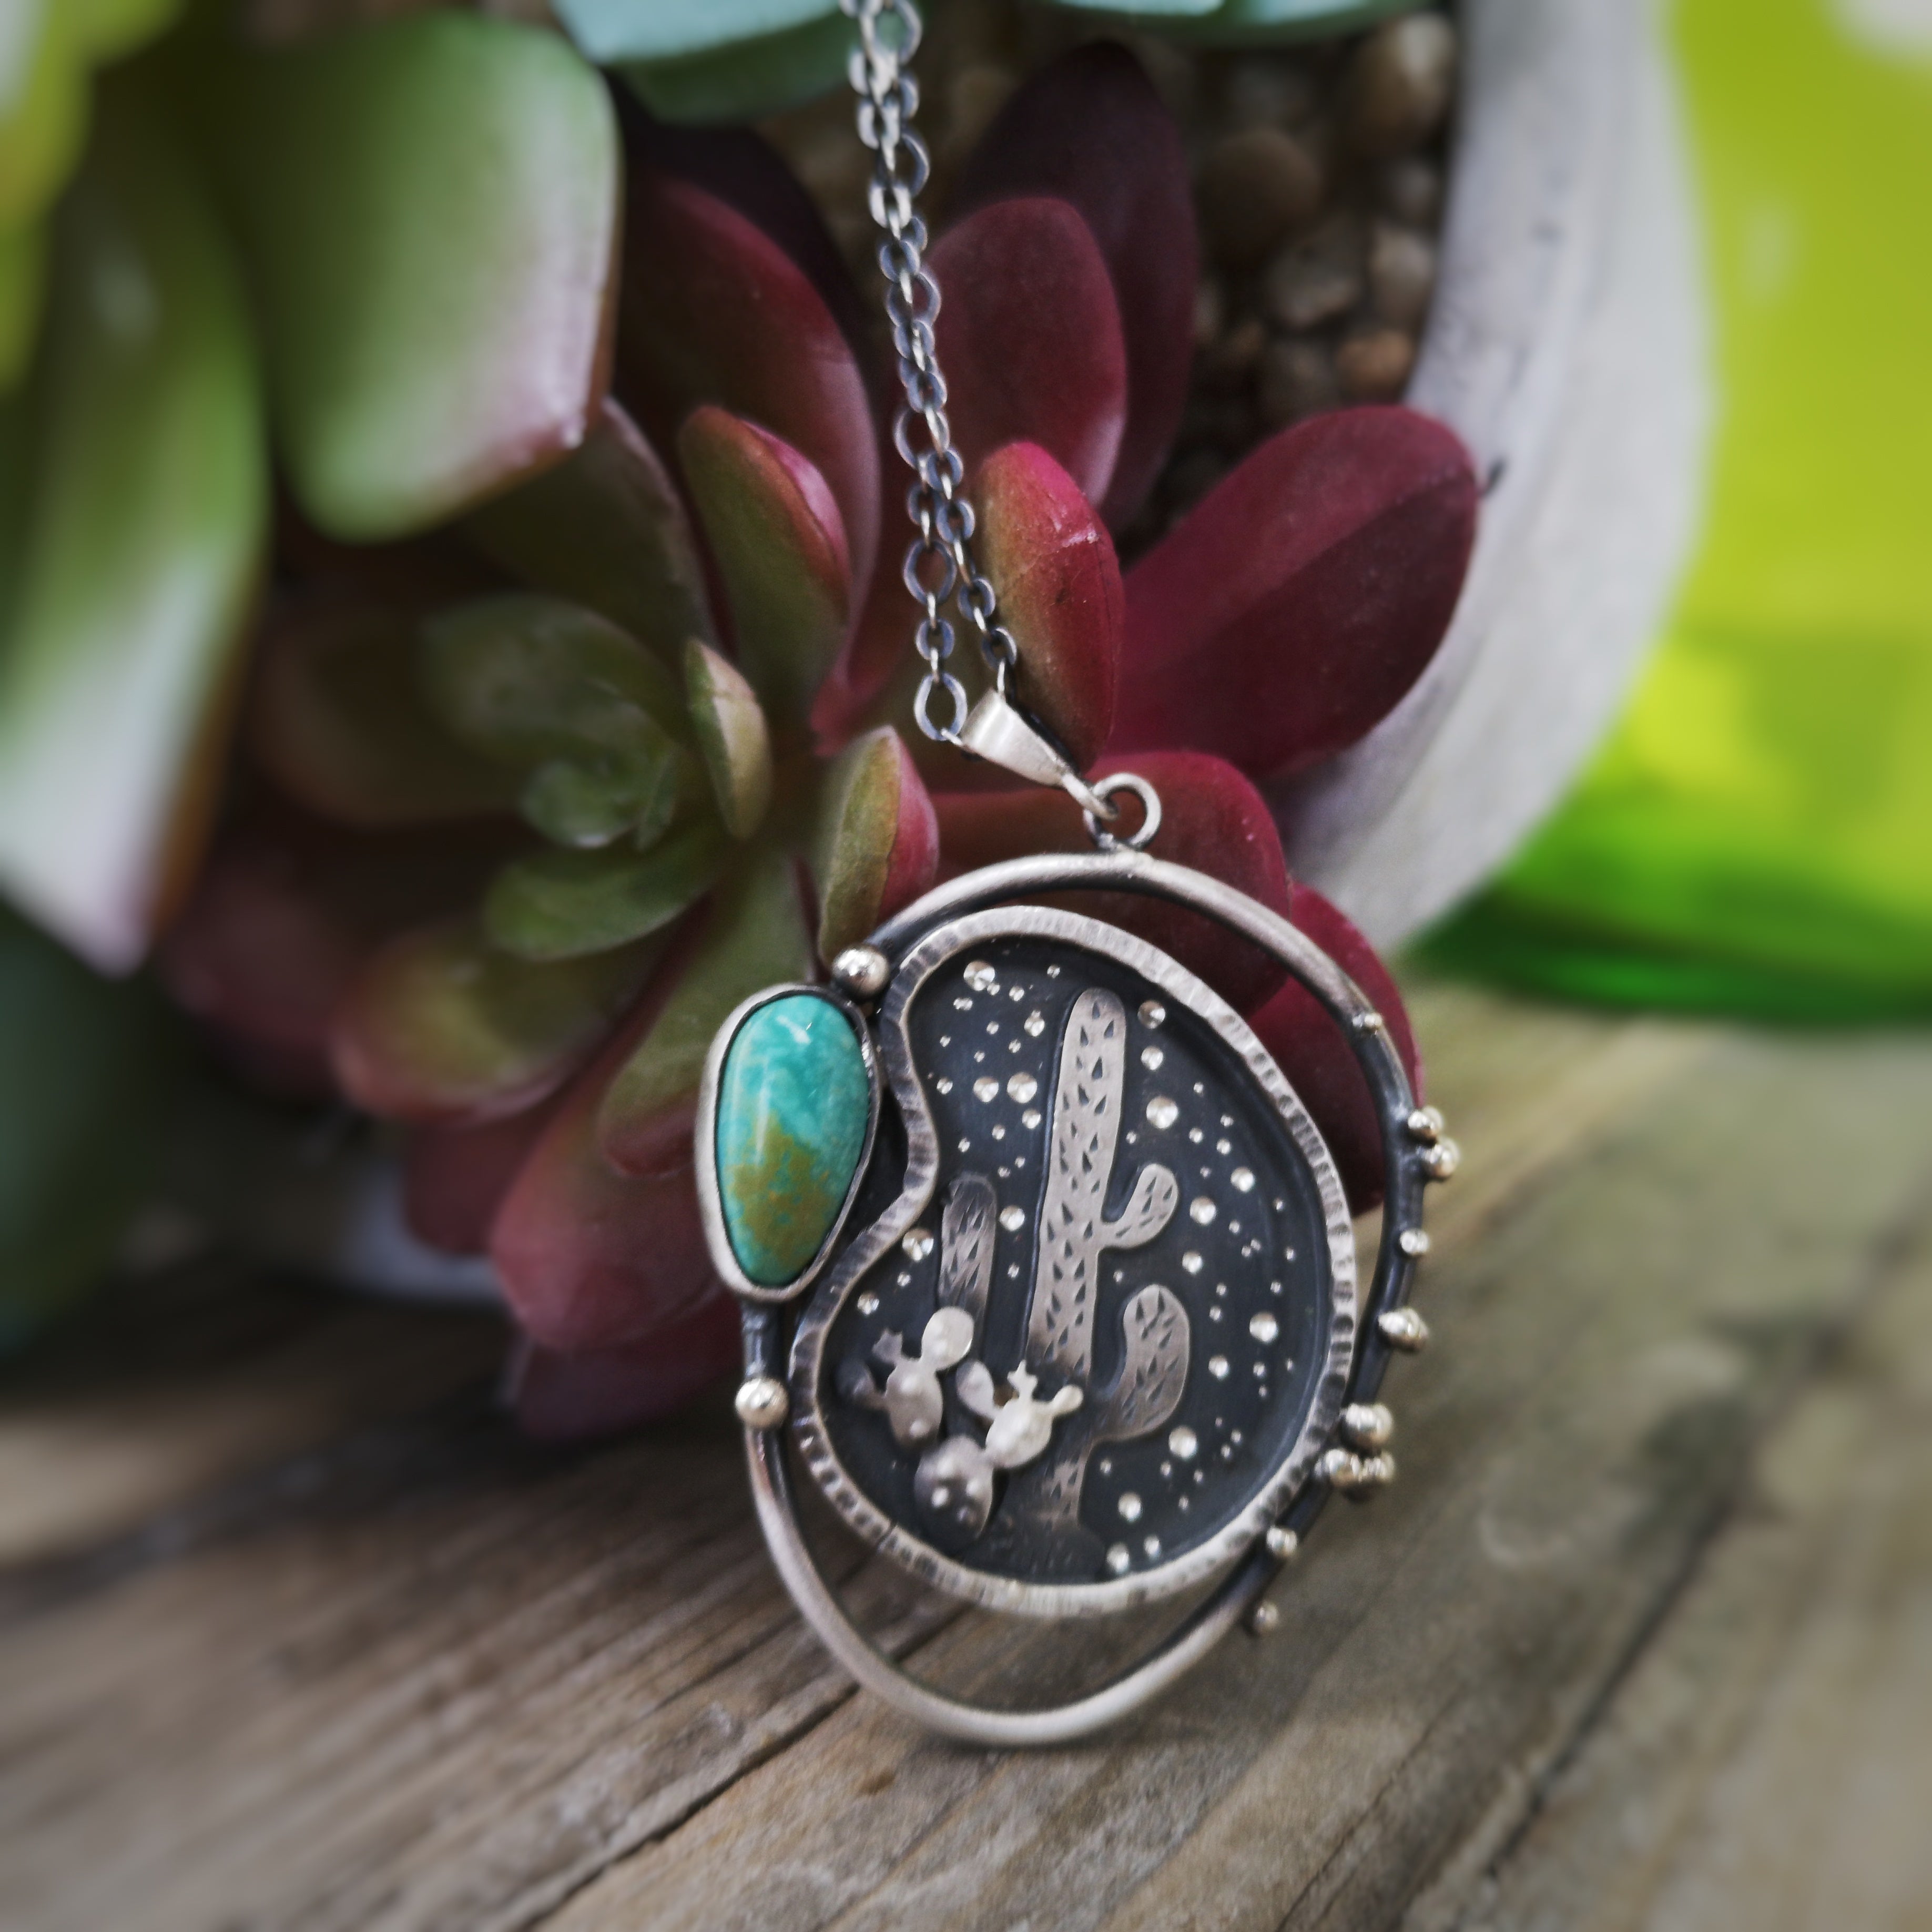 The Cactus Necklace with Hachita Turquoise